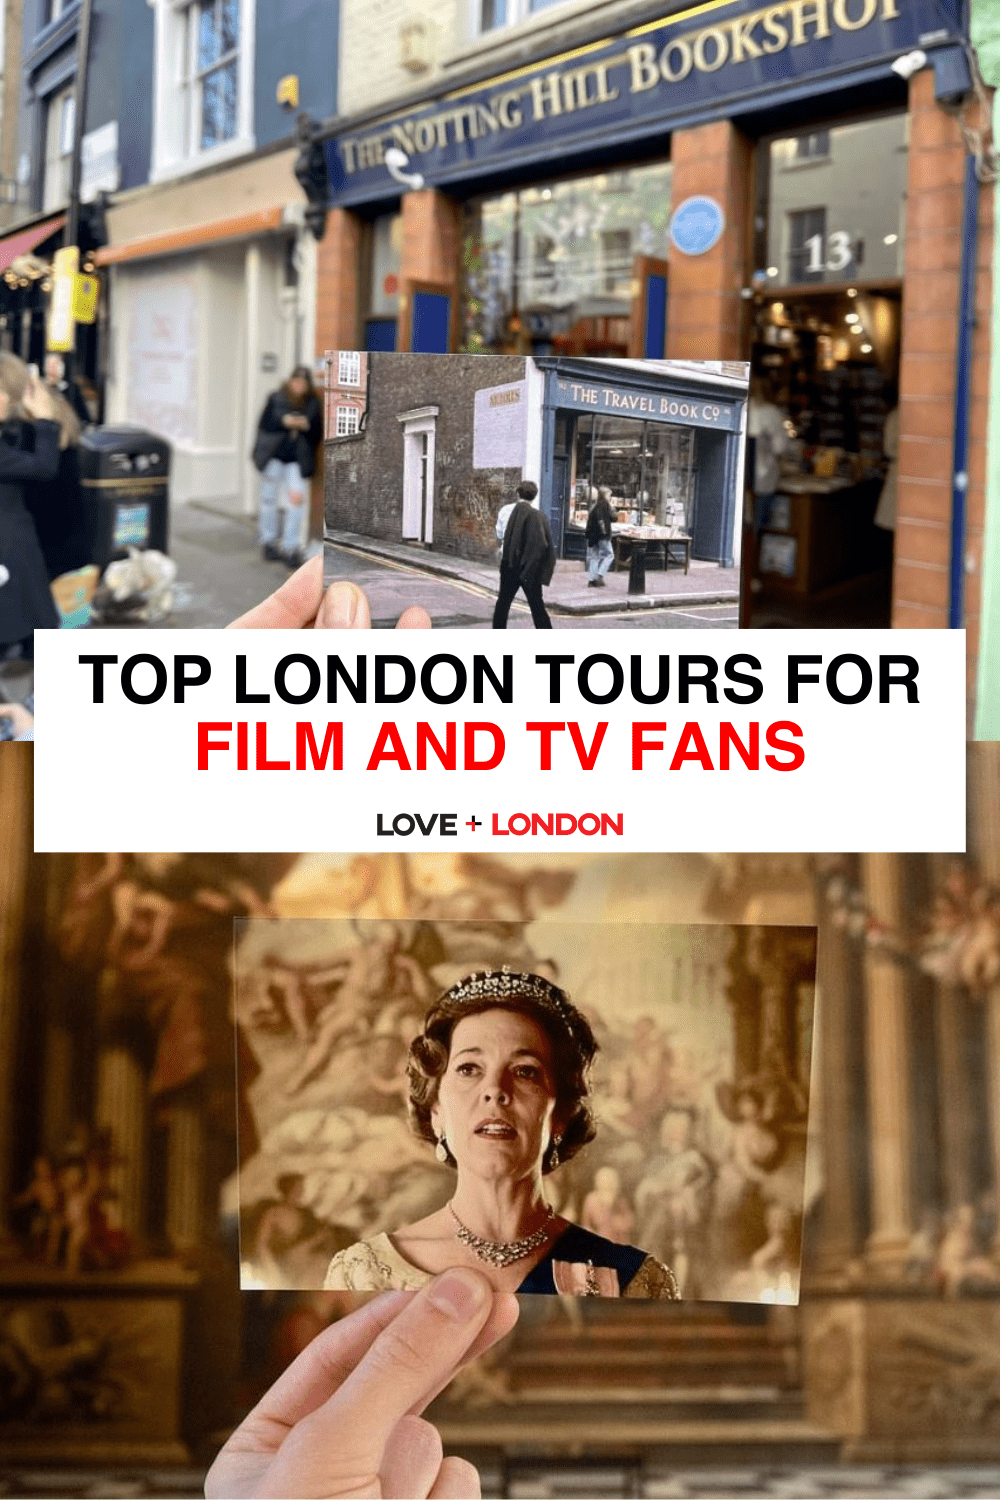 Top London Tours for Film and TV Fans